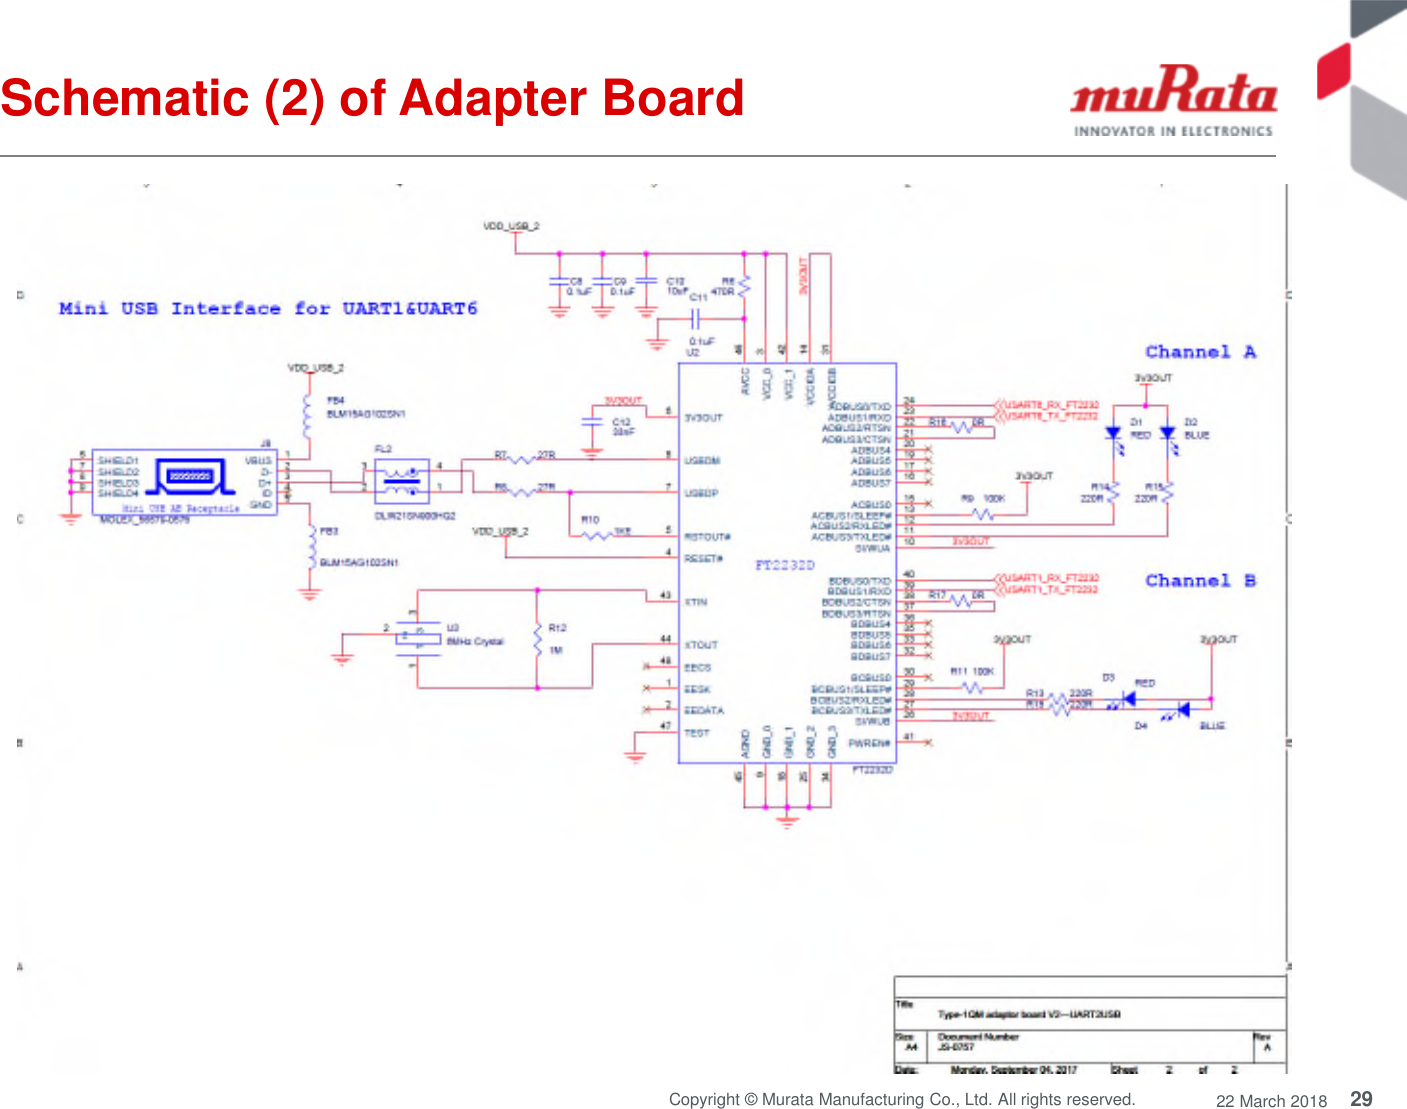 29Copyright © Murata Manufacturing Co., Ltd. All rights reserved. 22 March 2018Schematic (2) of Adapter Board